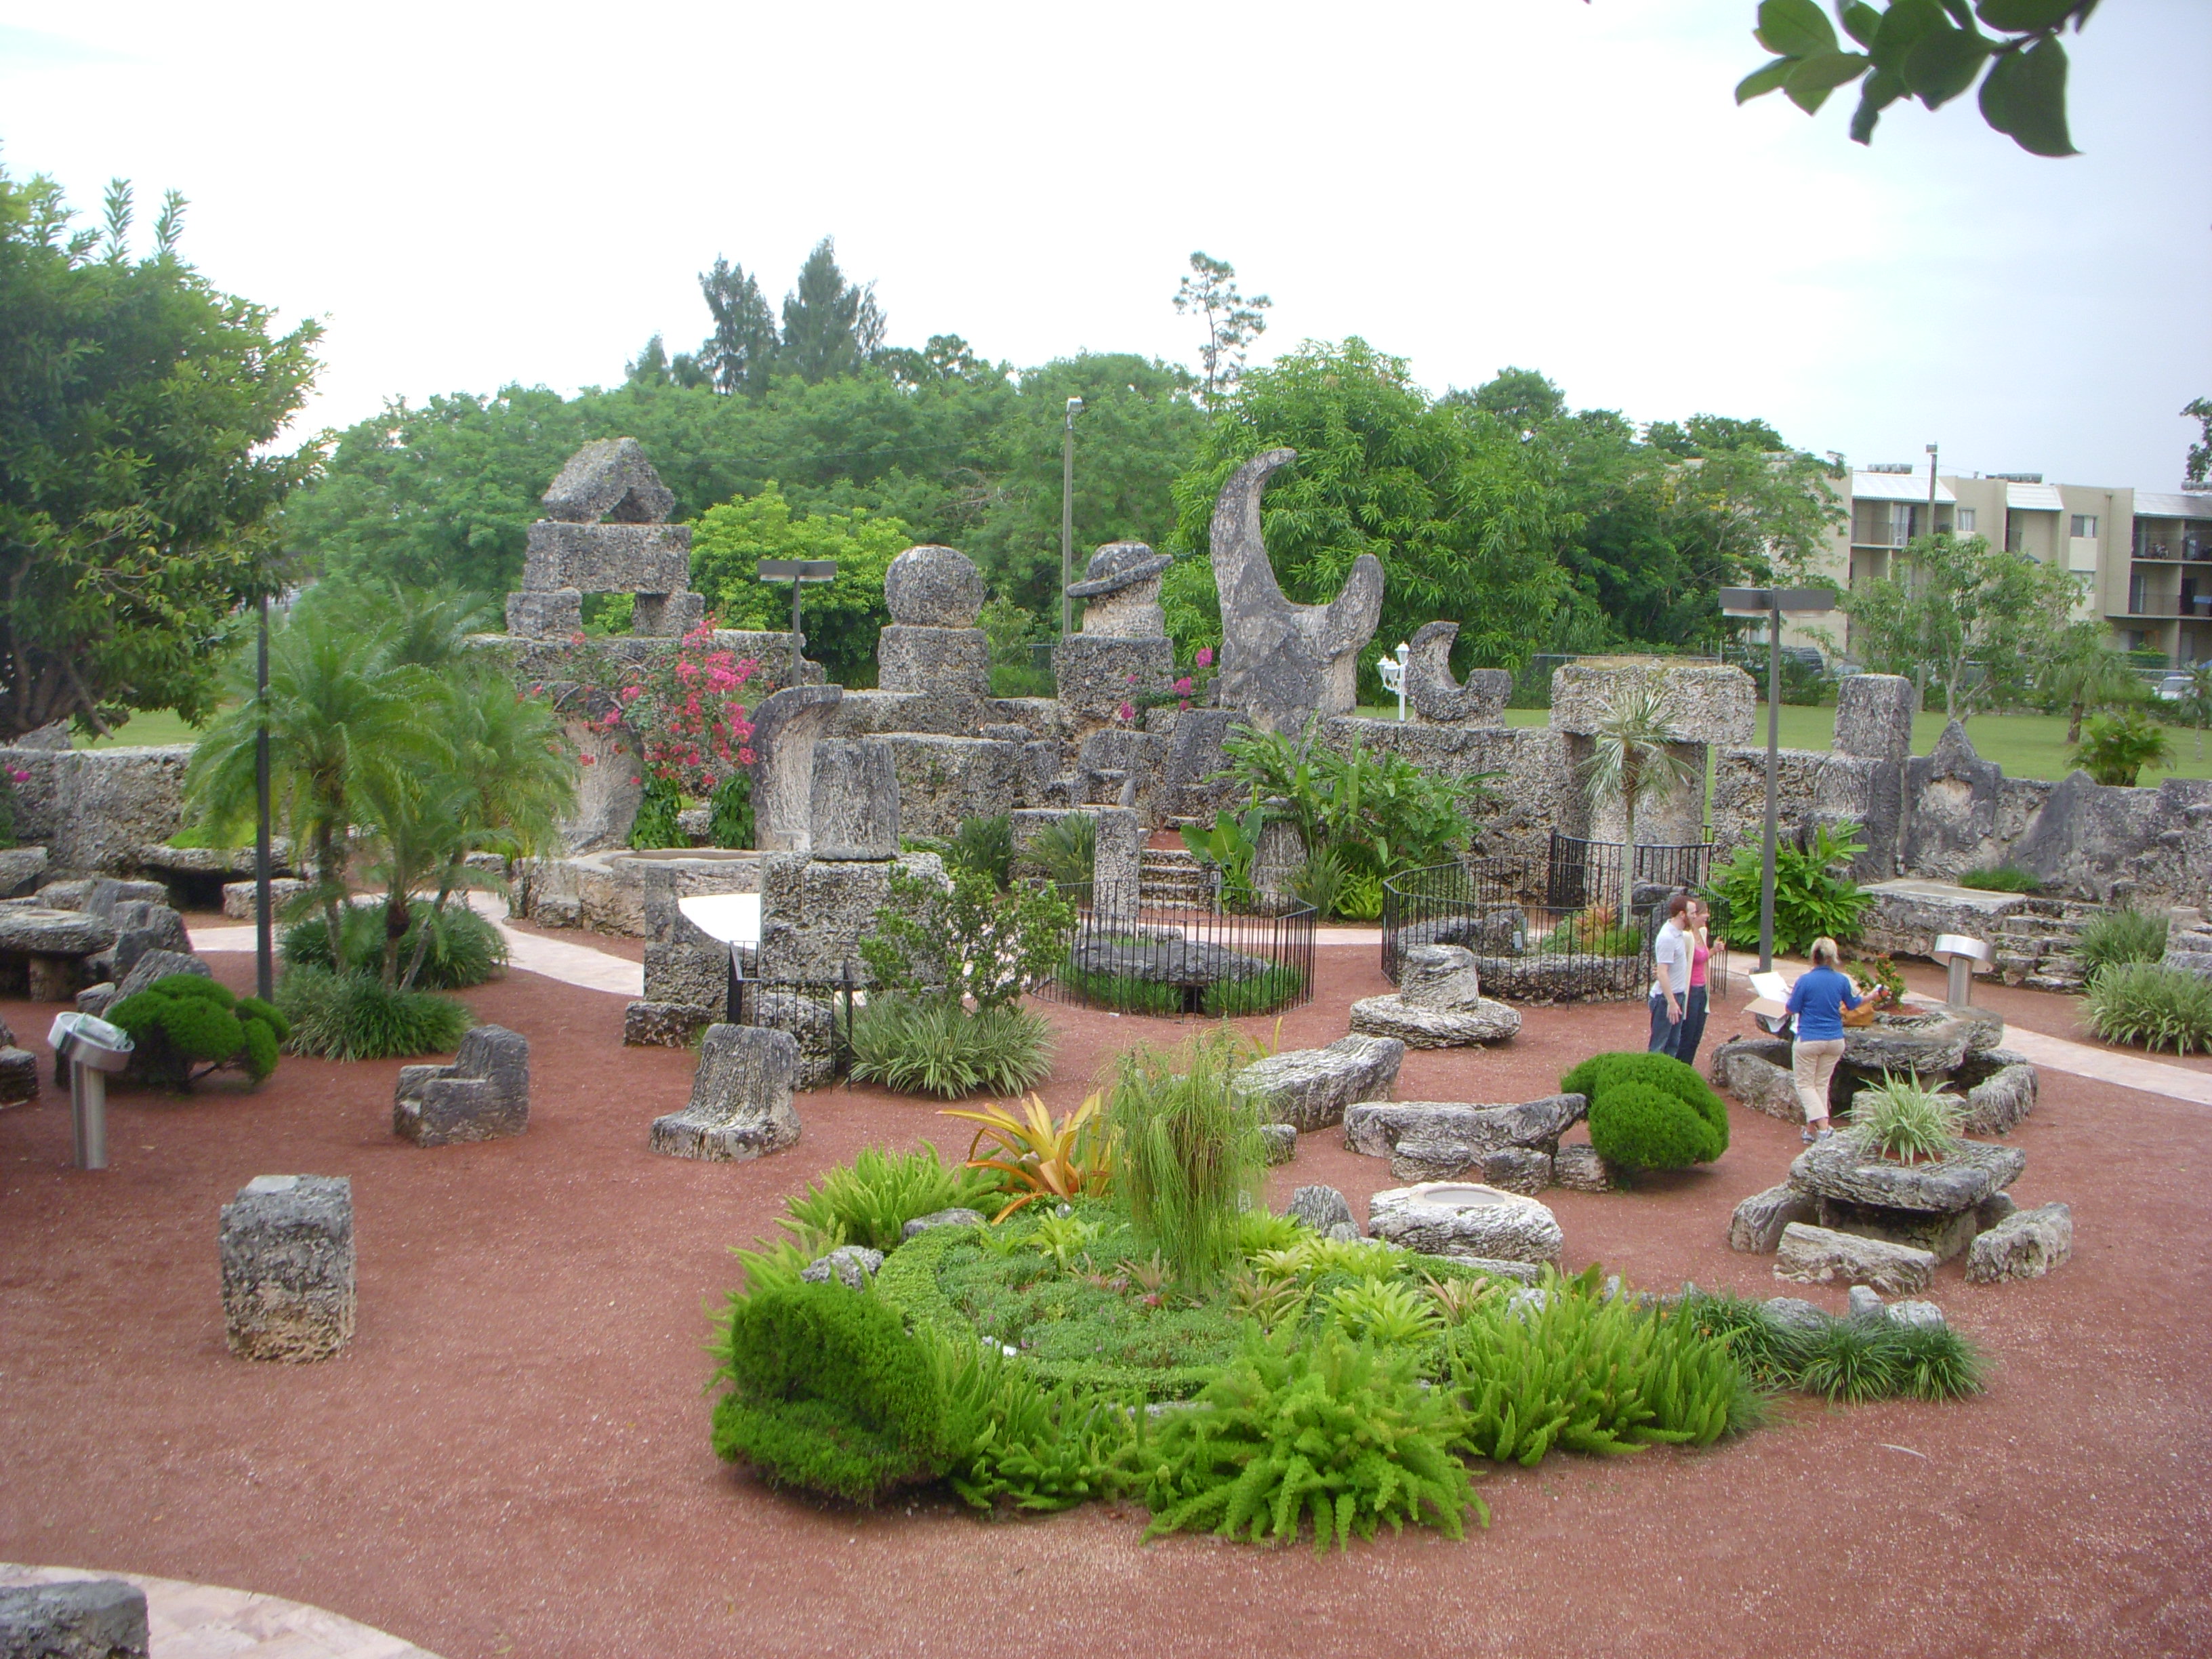 A wide view of Coral Castle which has been compared very closely to the modern-day Stonehenge (Photo by Laurie Charles).